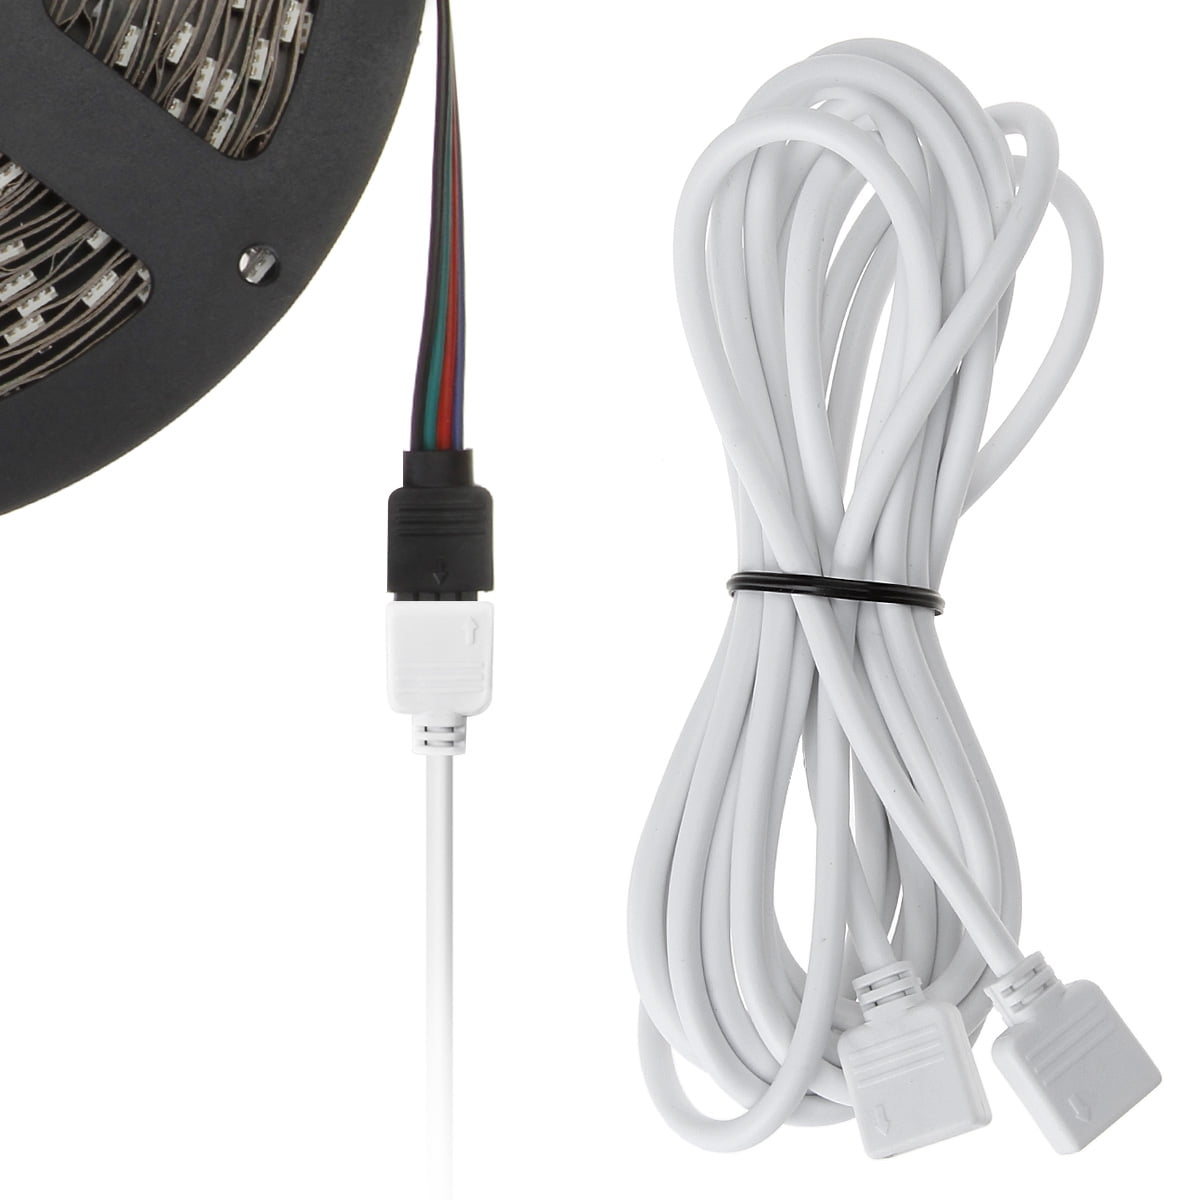 SUPERNIGHT® 2.5M/5M Extension Cable 4-Pin Wire for RGB 5050 3528 Led Strip Light 